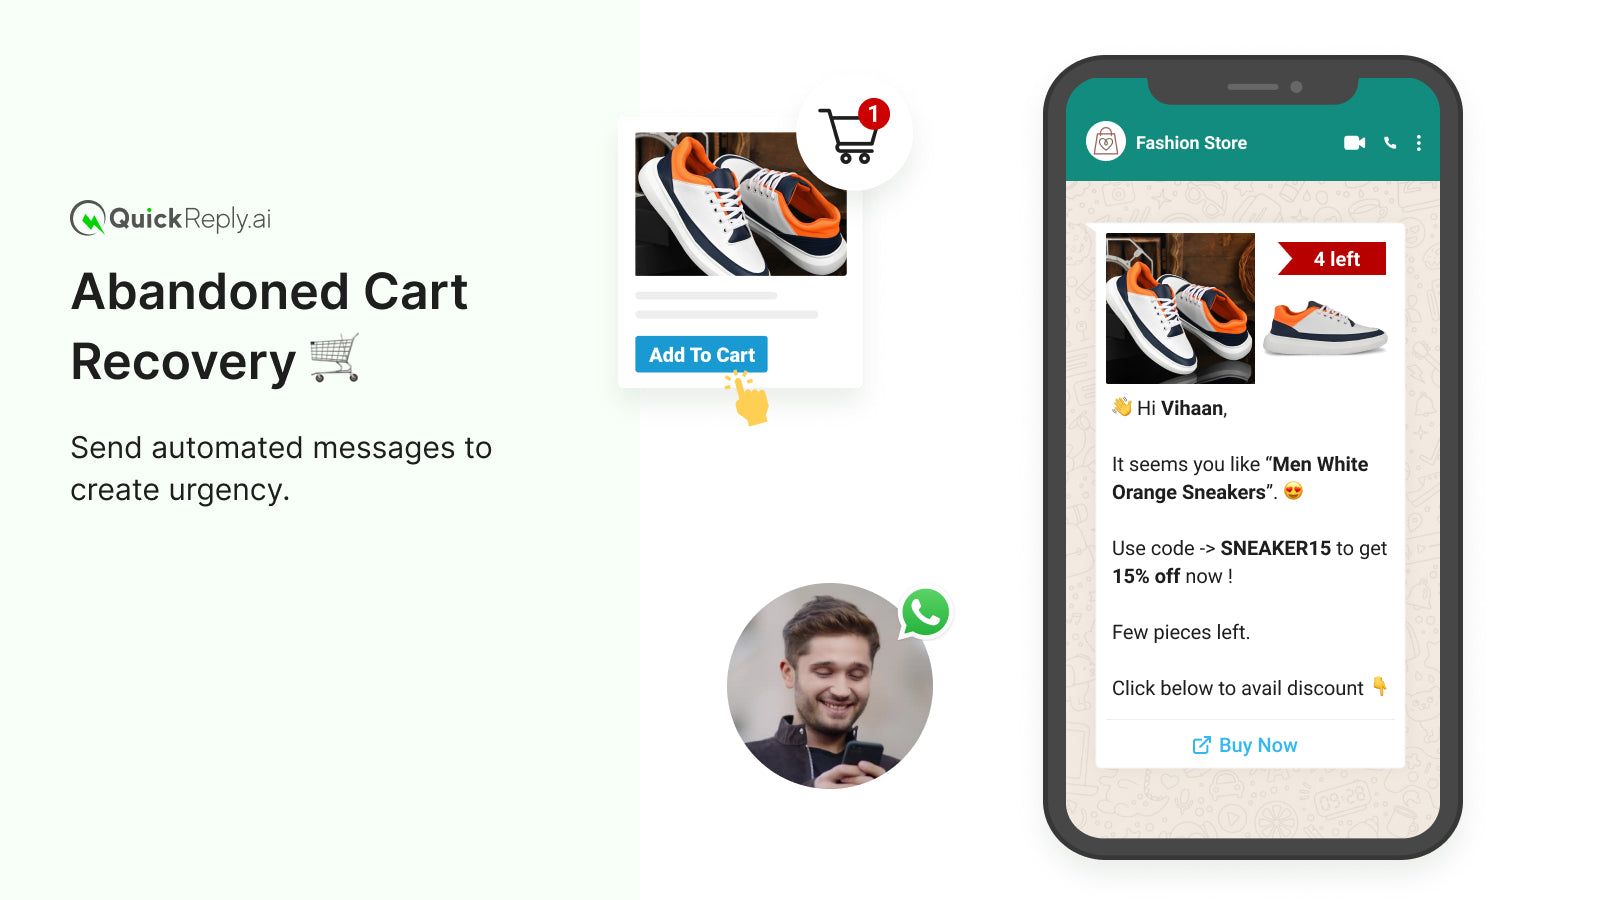 Abandoned Cart Recovery Sequence on WhatsApp